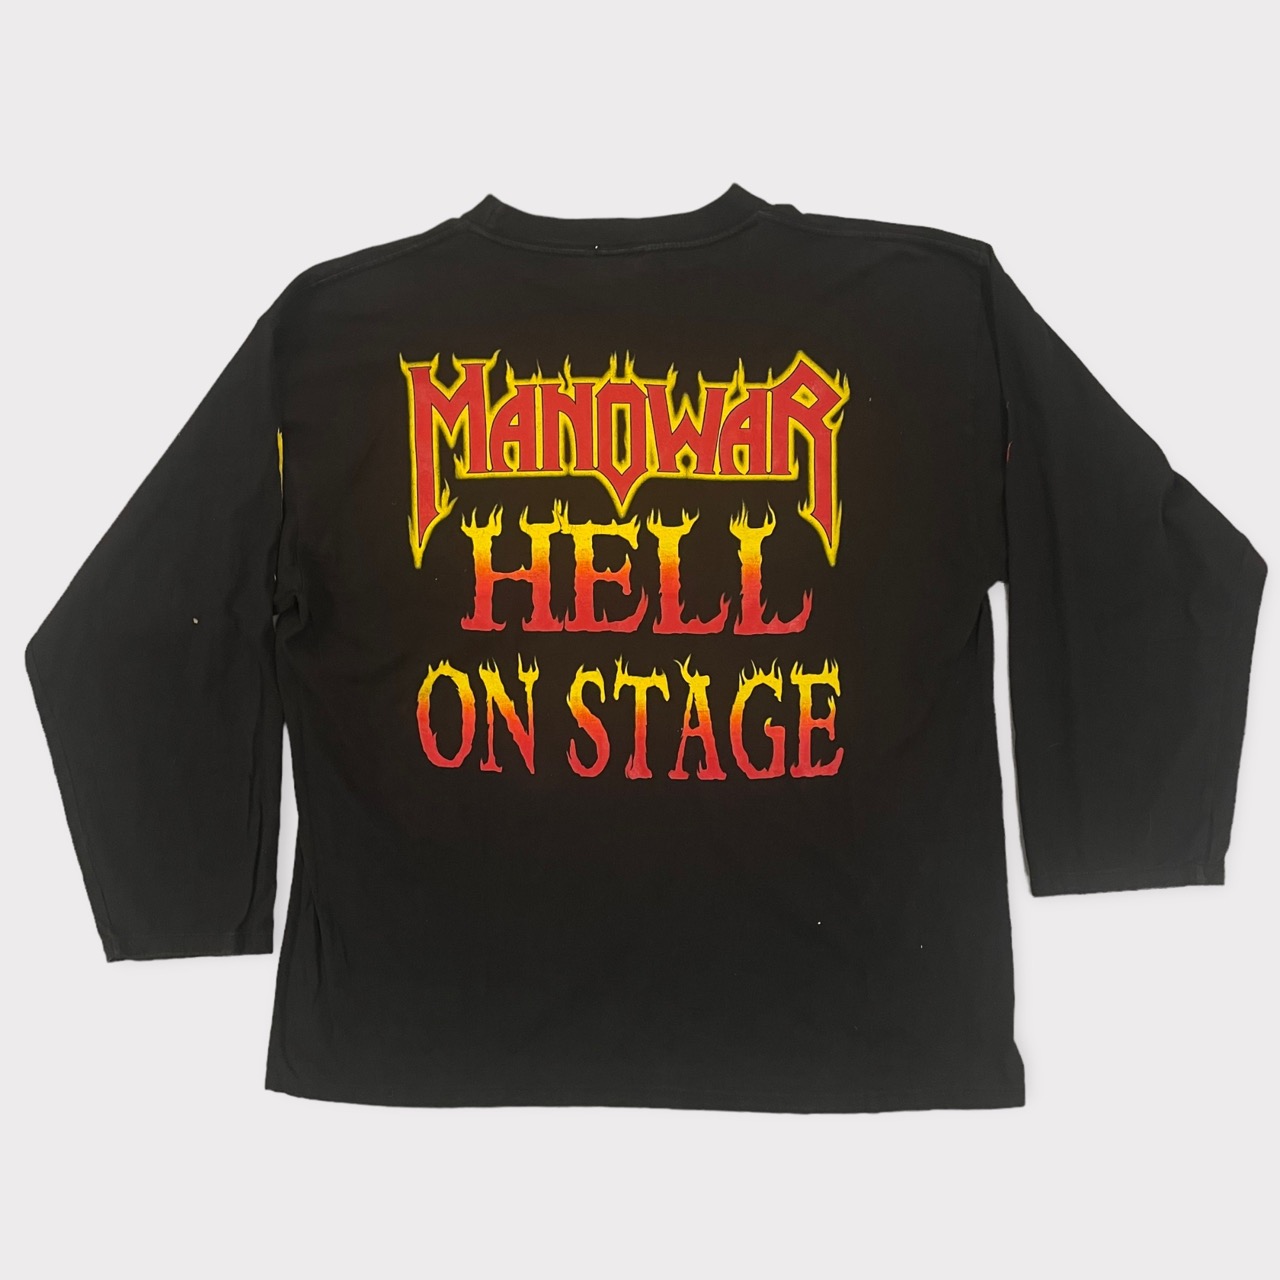 MANOWAR HELL ON STAGE TOUR LONSLEEVE T-SHIRT